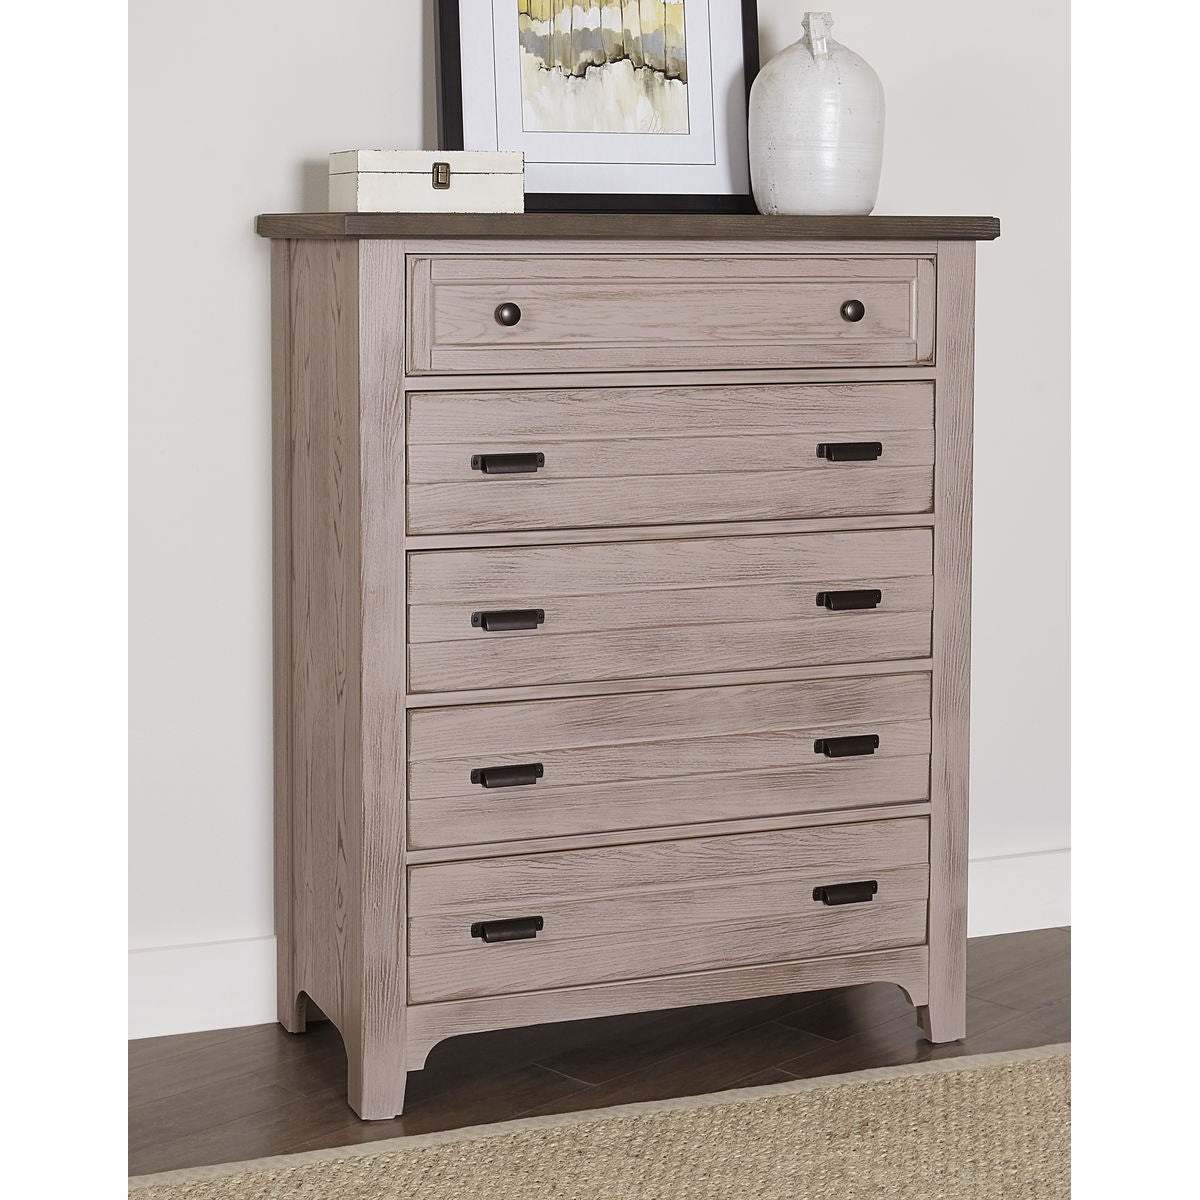 Bungalow 5 Drawer Chest